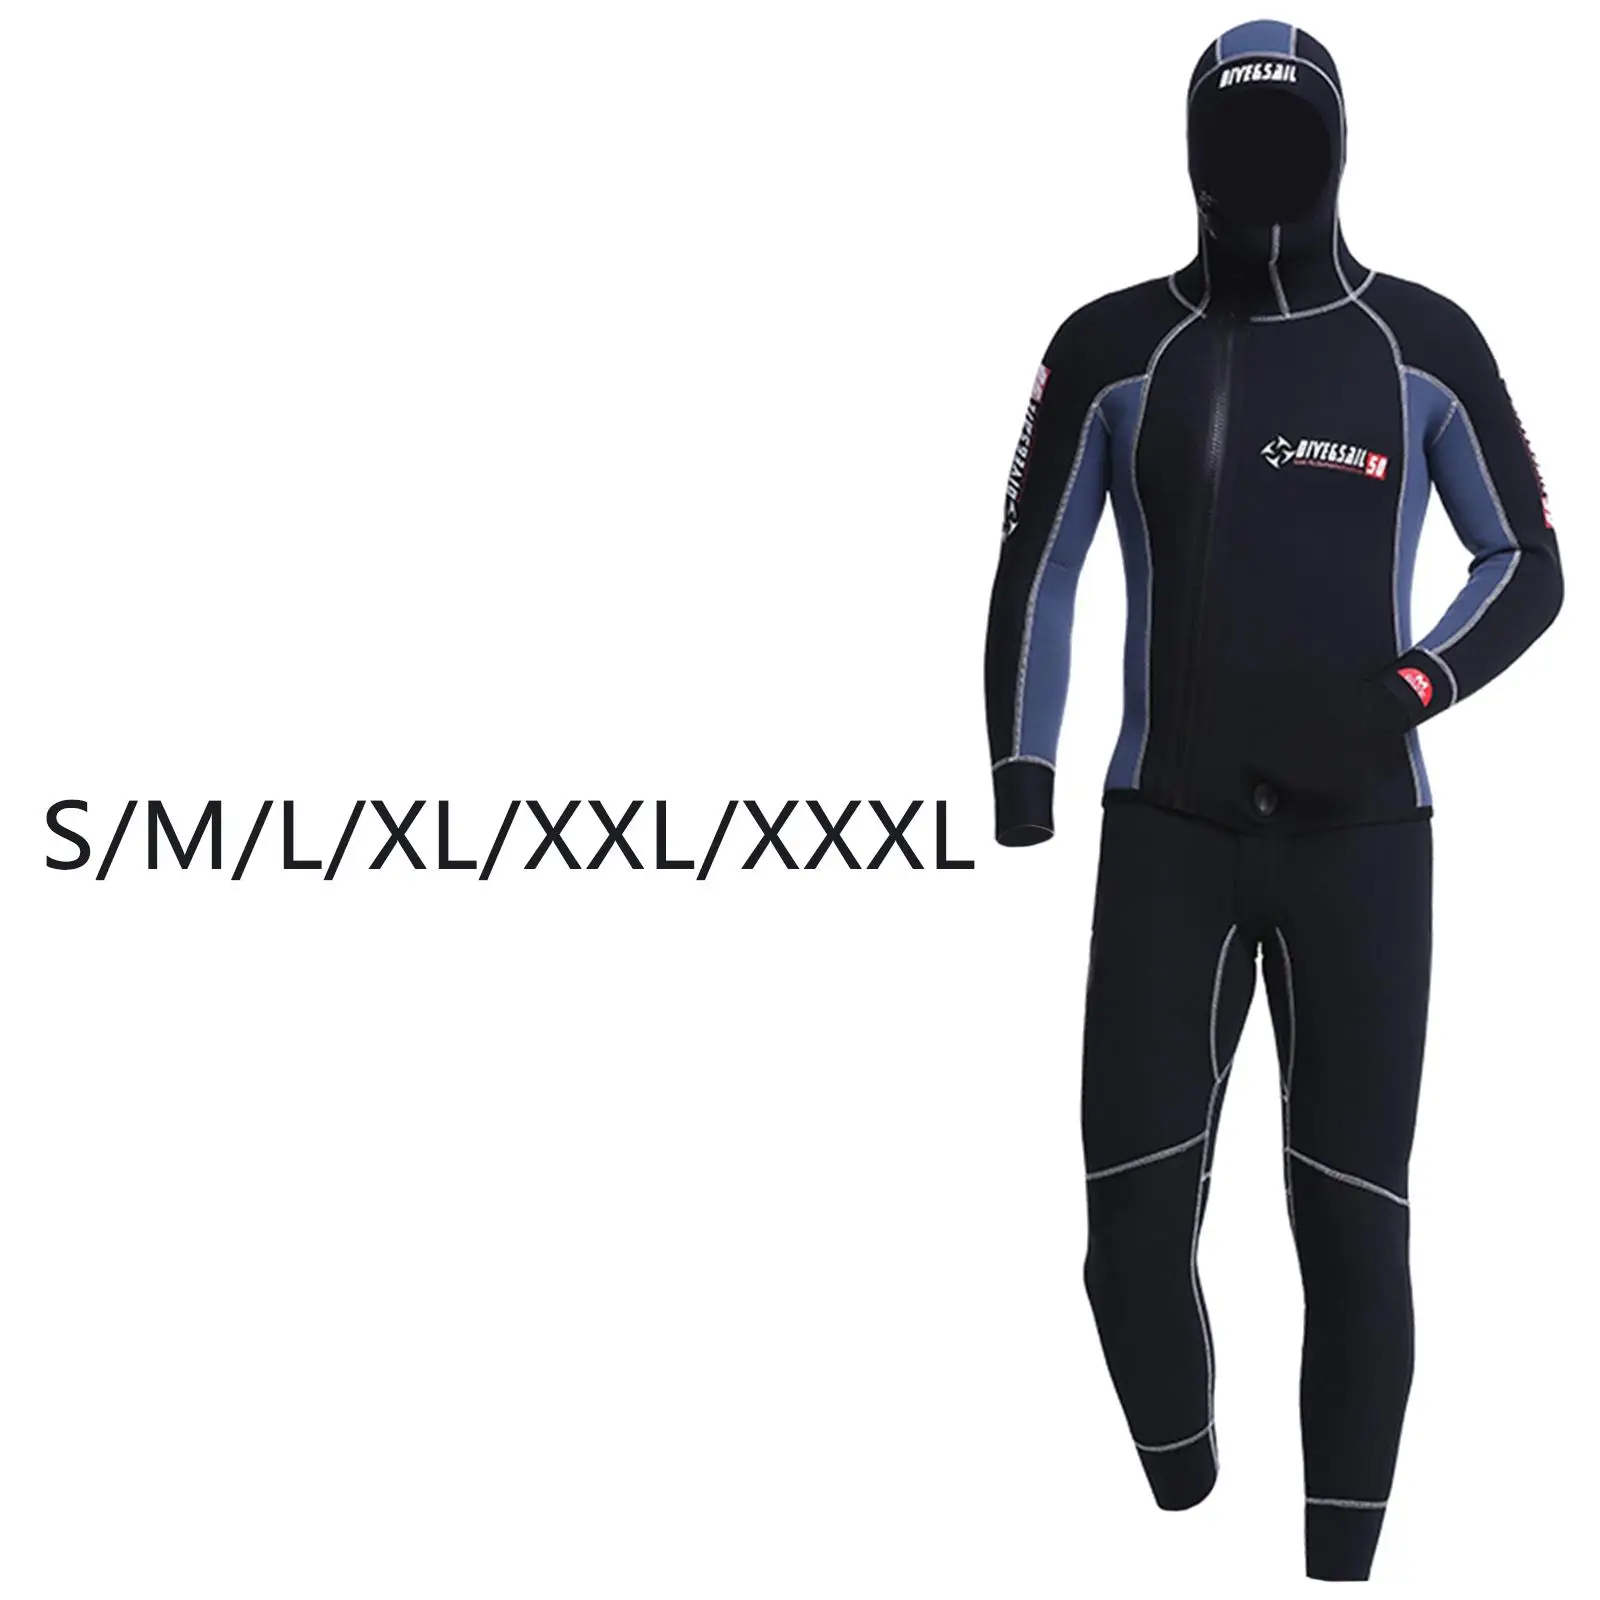 Men Wetsuit, 5mm Neoprene Two Piece Swimsuit, Long Sleeves, Warm And UV Protection, Suitable for Diving Swimming Surfing